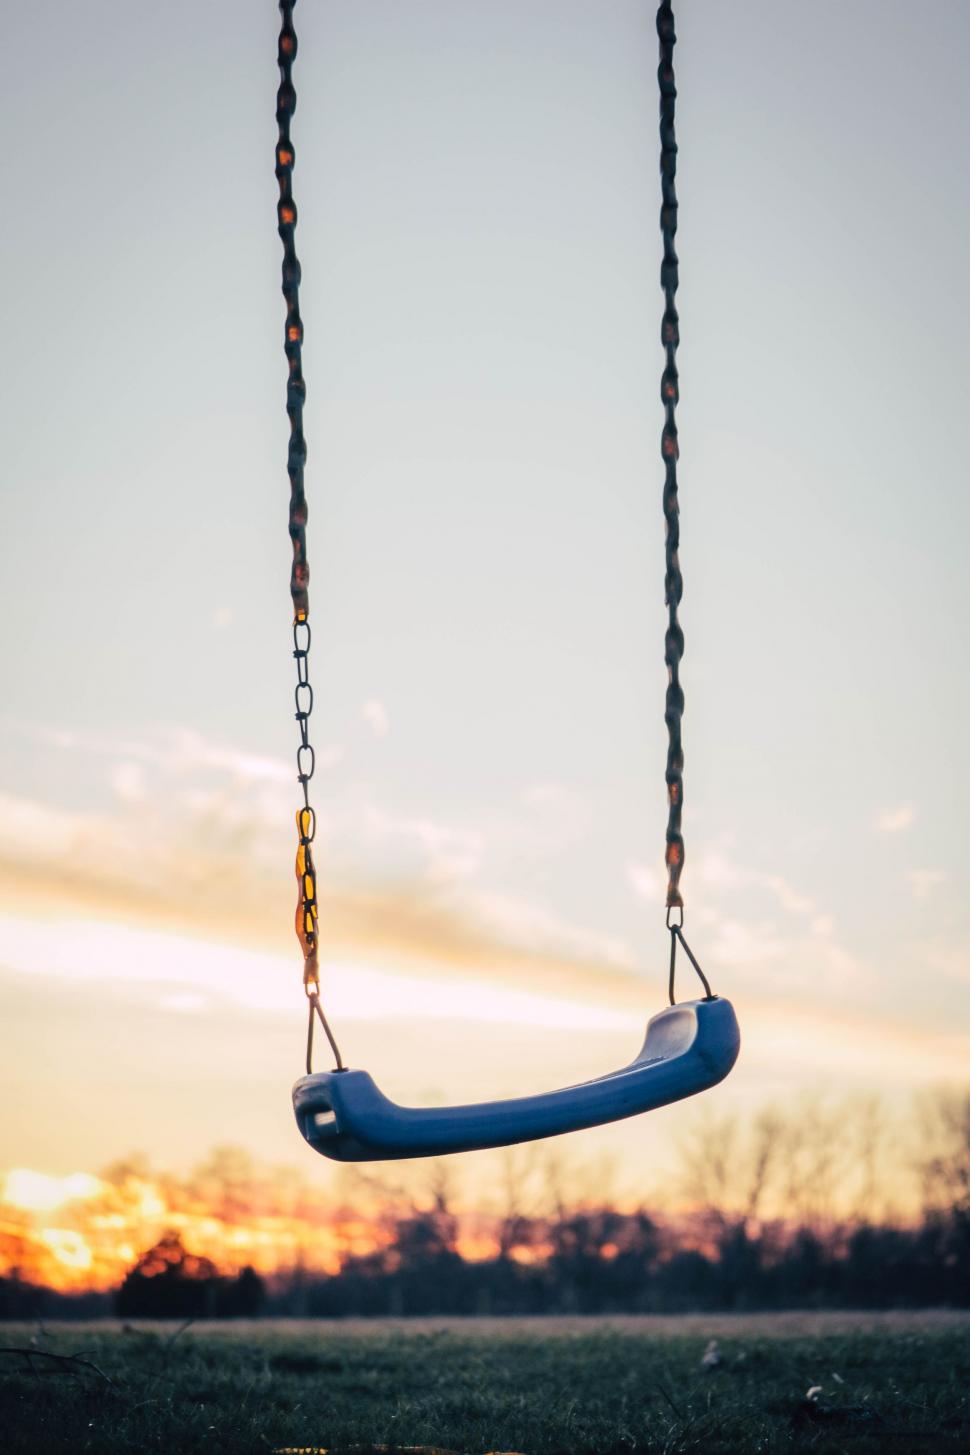 Free Image of Childs Swing Hanging From Chain at Sunset 